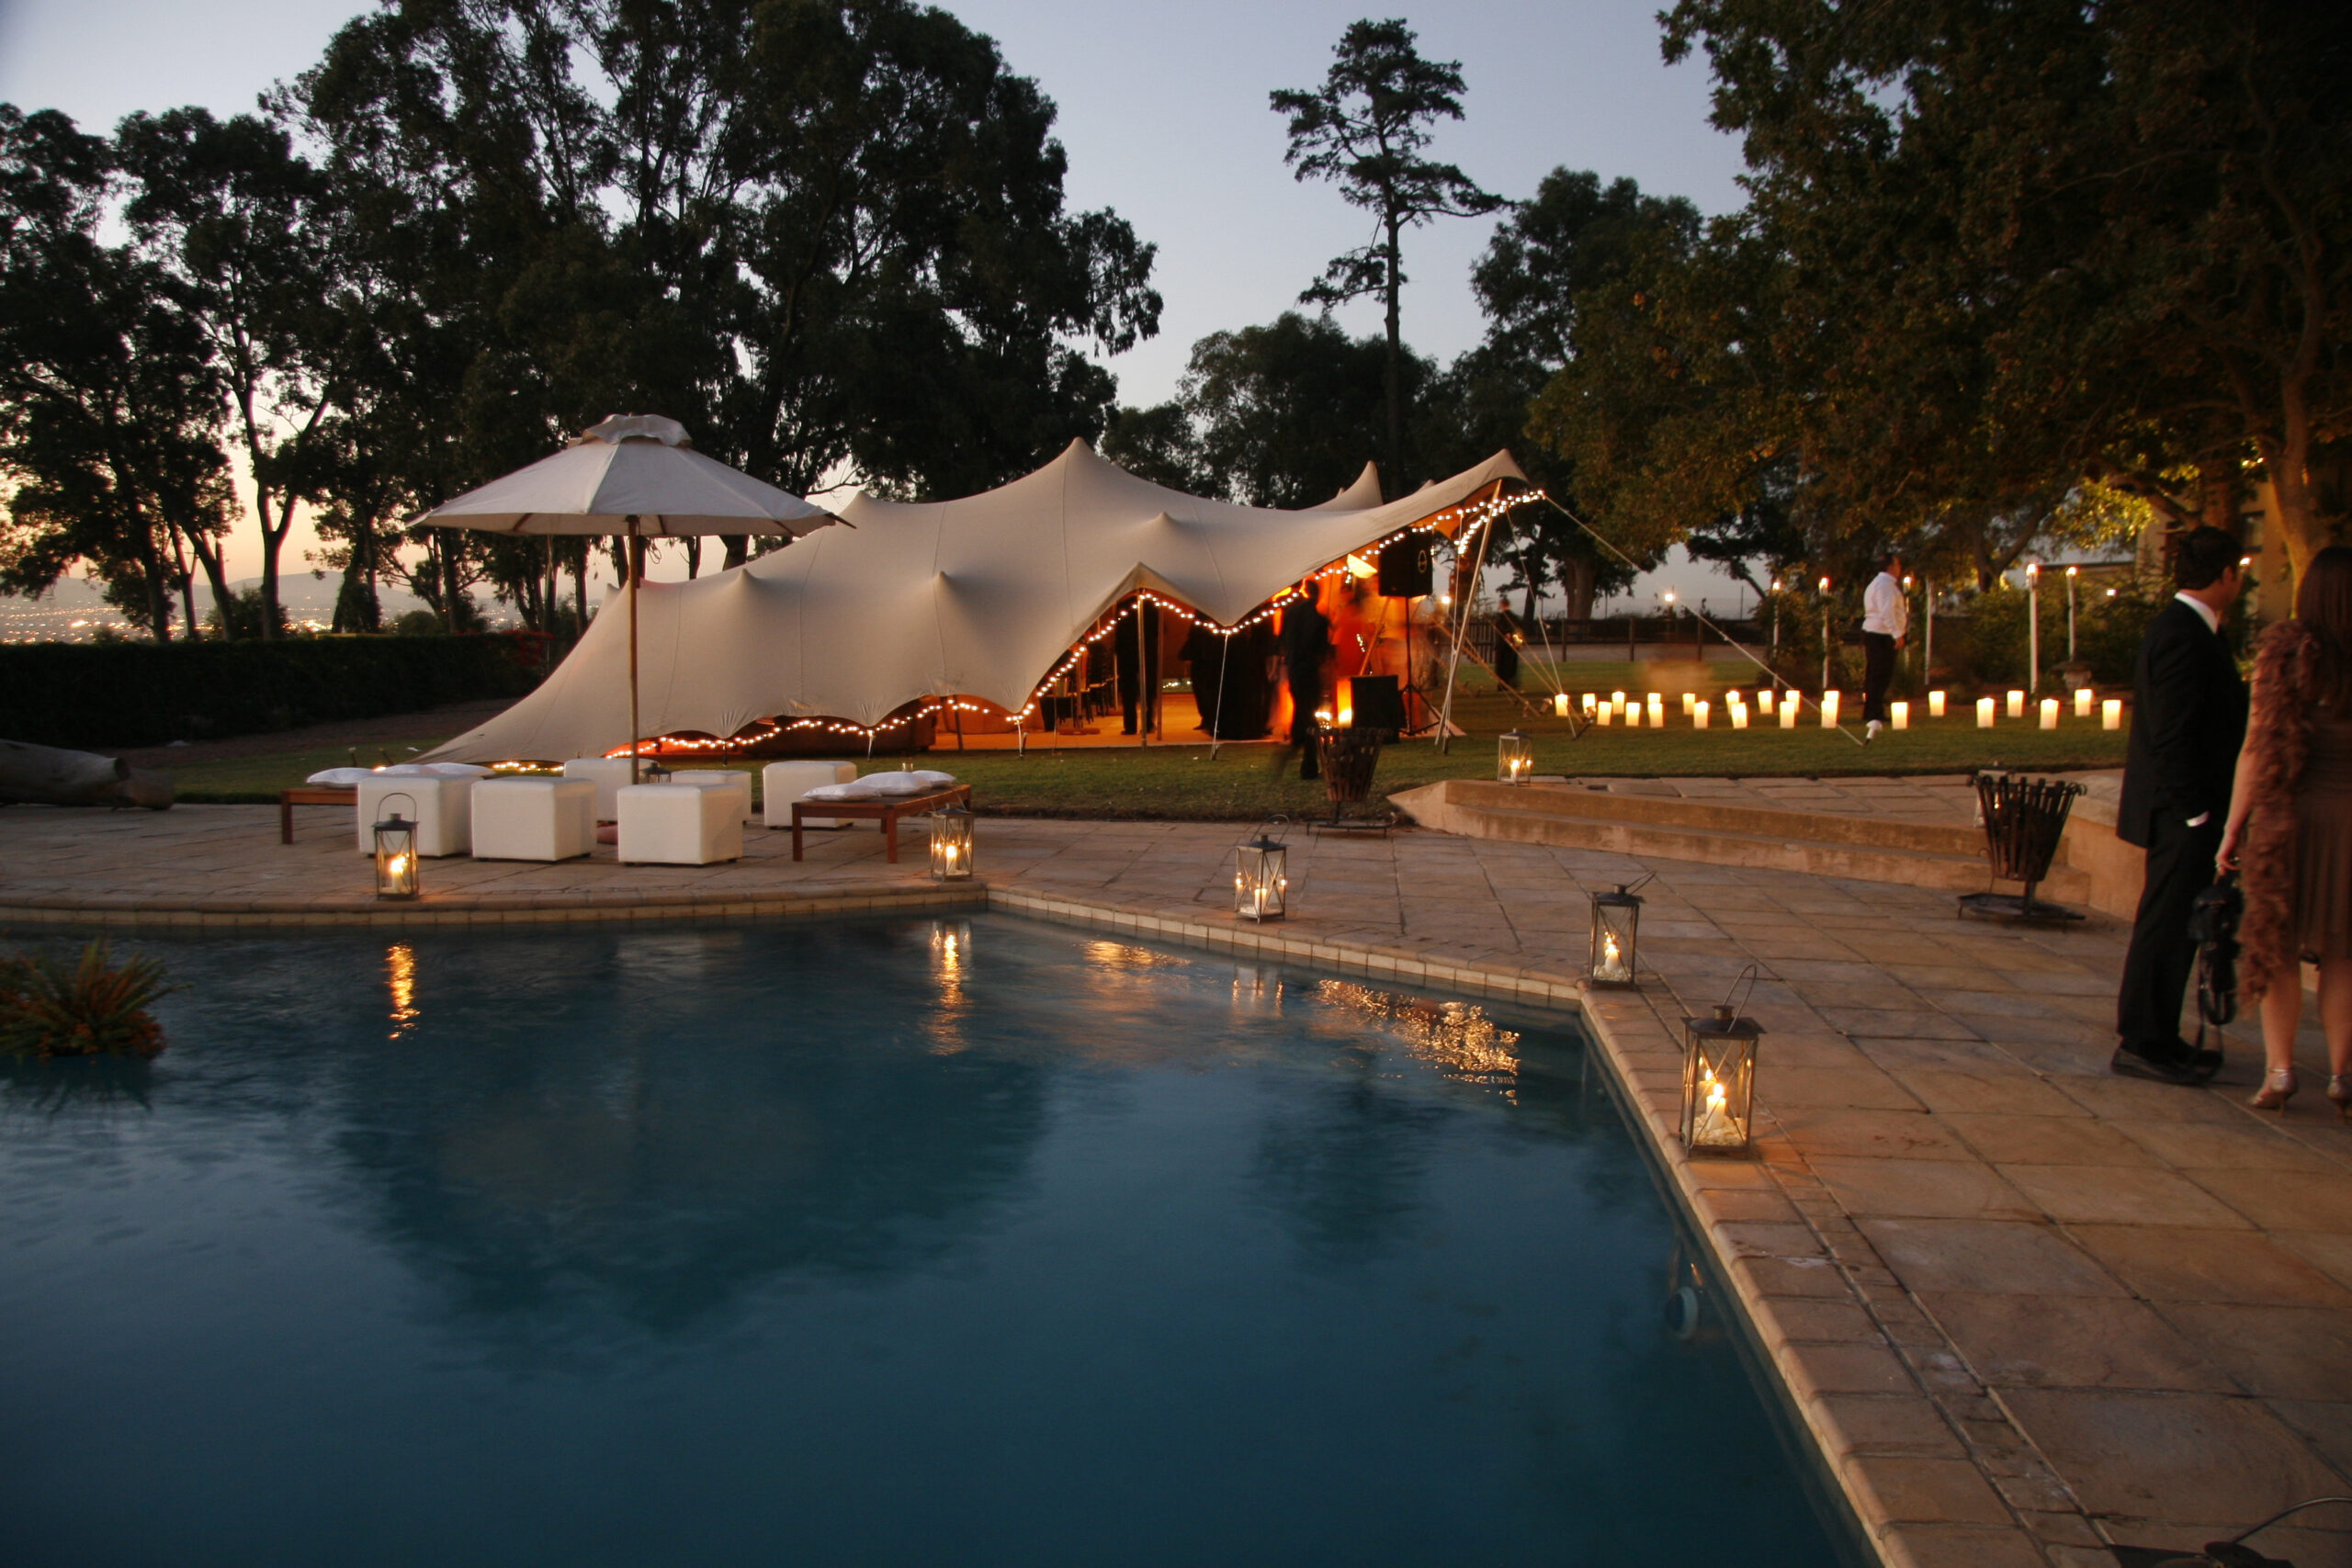 Stretch tent at wedding with pool in foreground